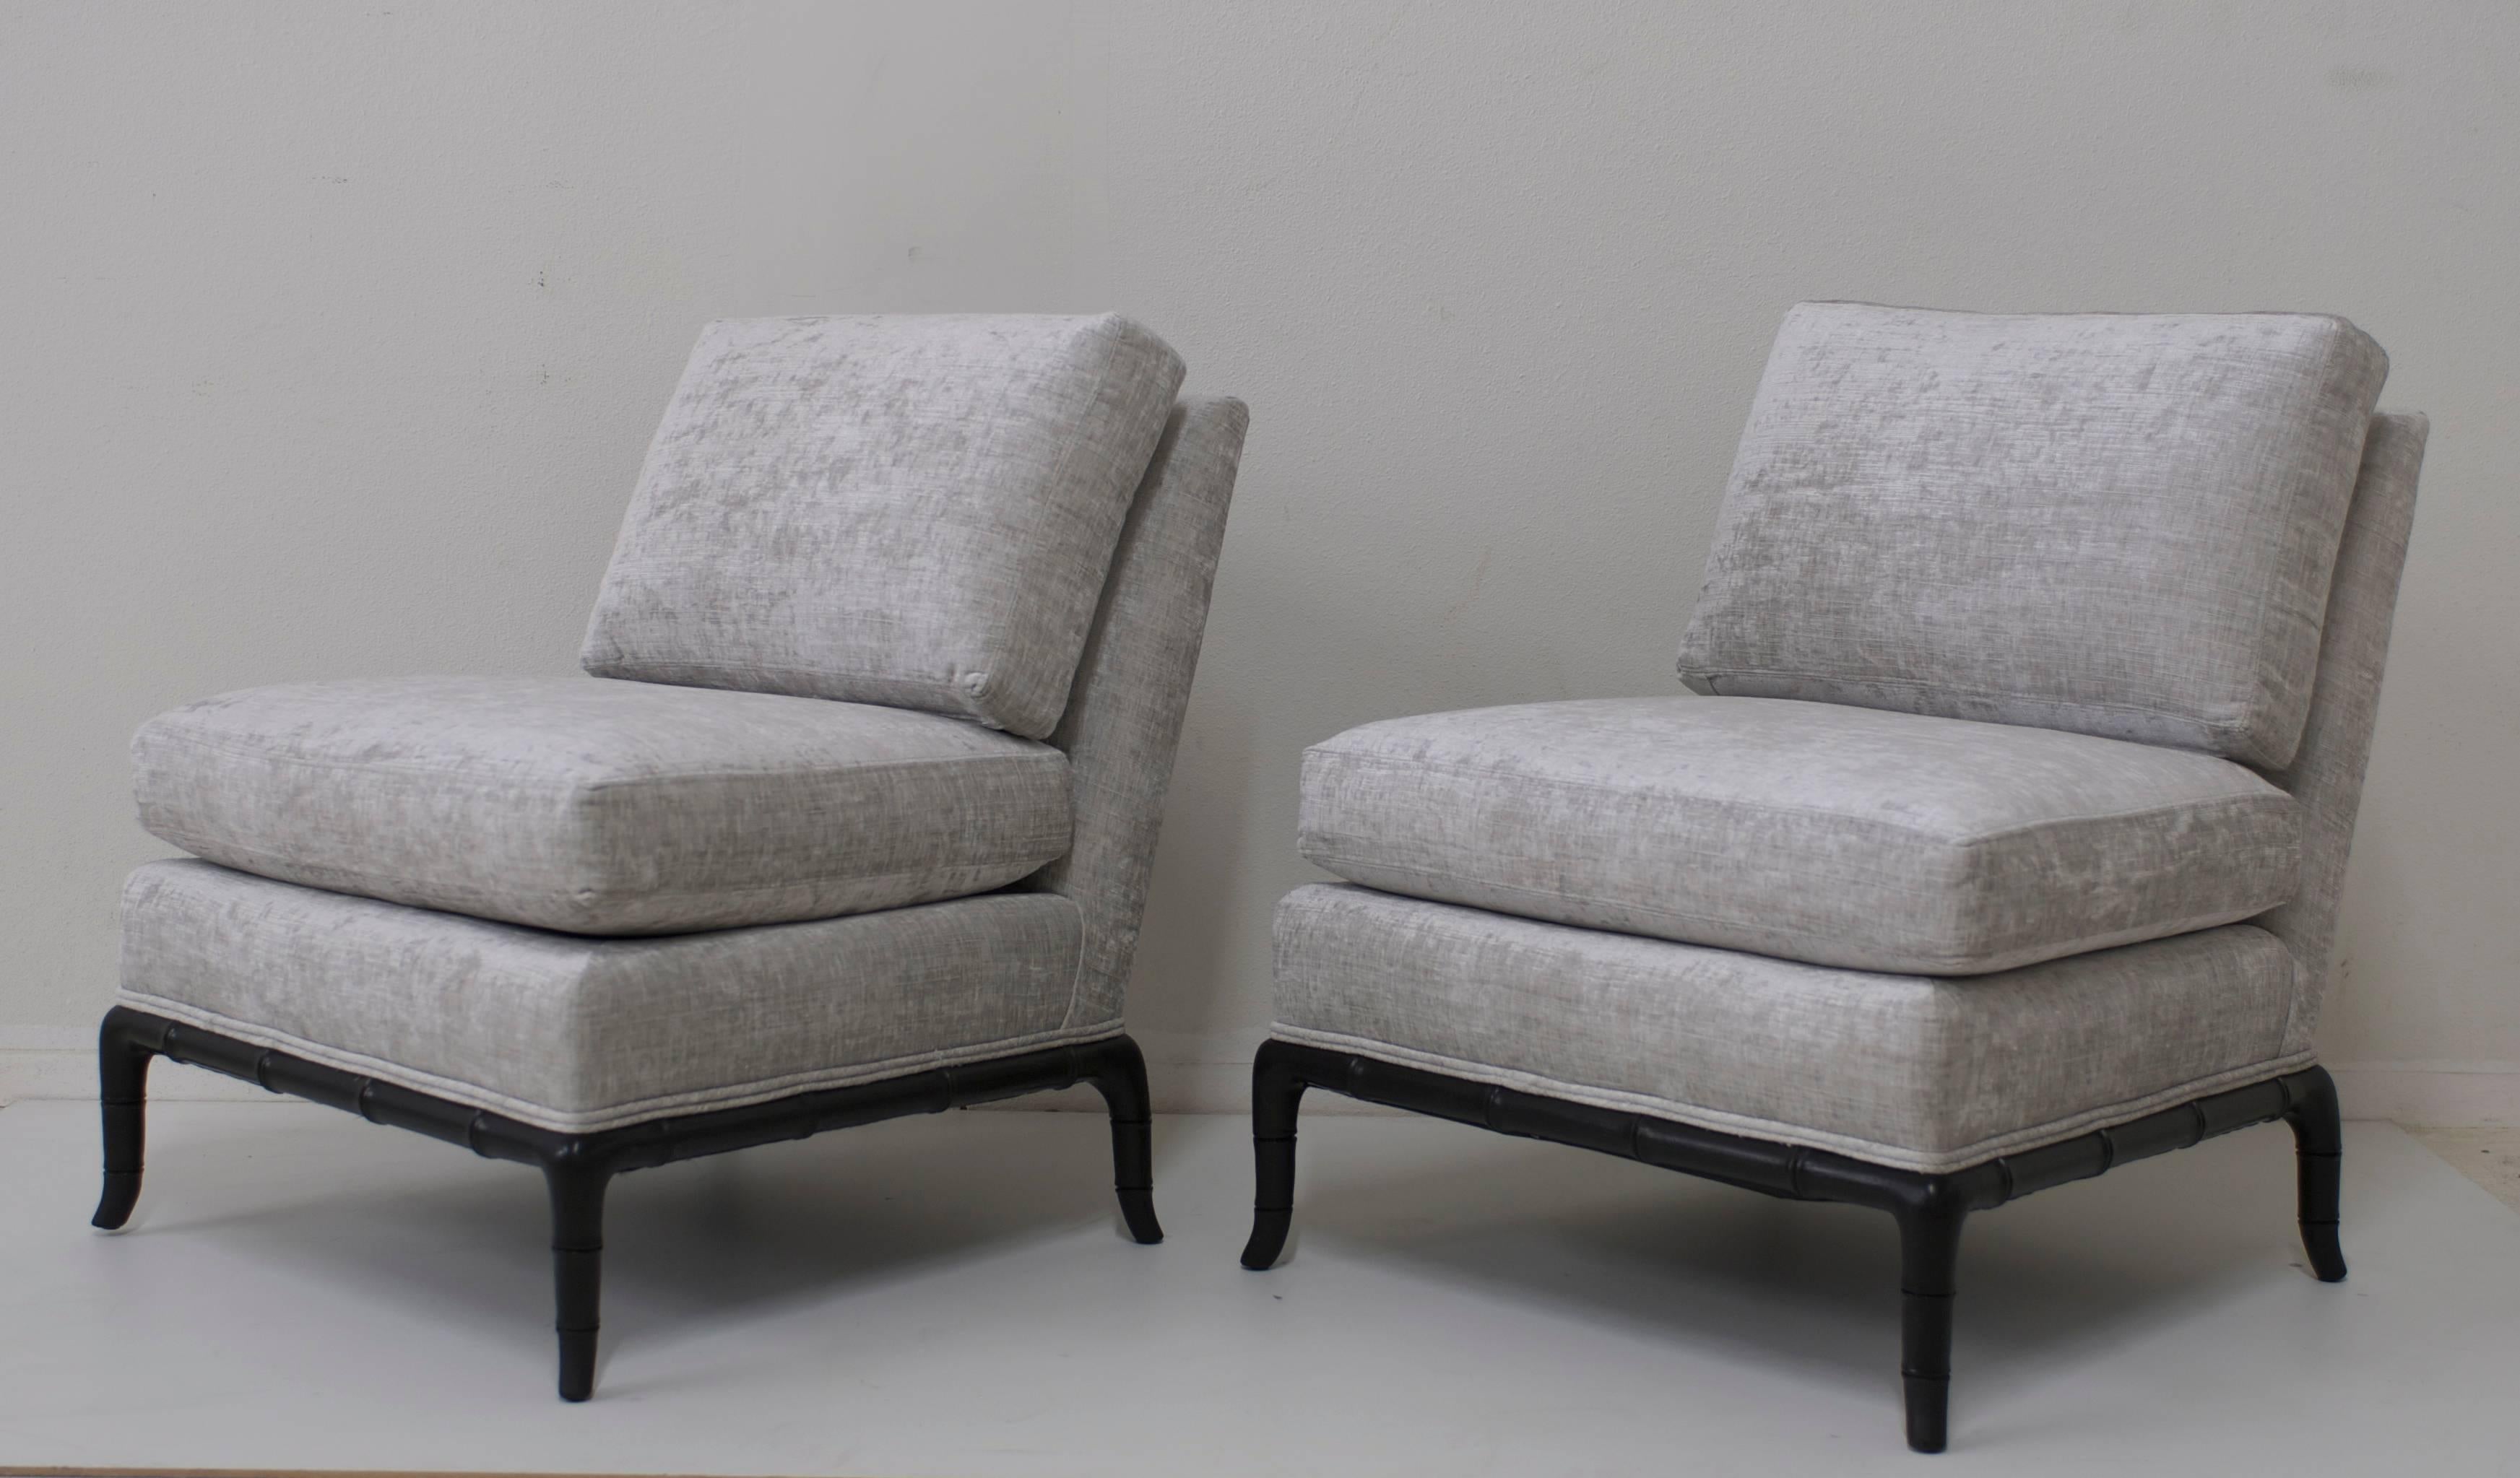 This pair of slipper chairs have been reupholstered in a nice silver gray platinum velvet. The base is carved faux bamboo ebonized wood. The legs are horn shaped.